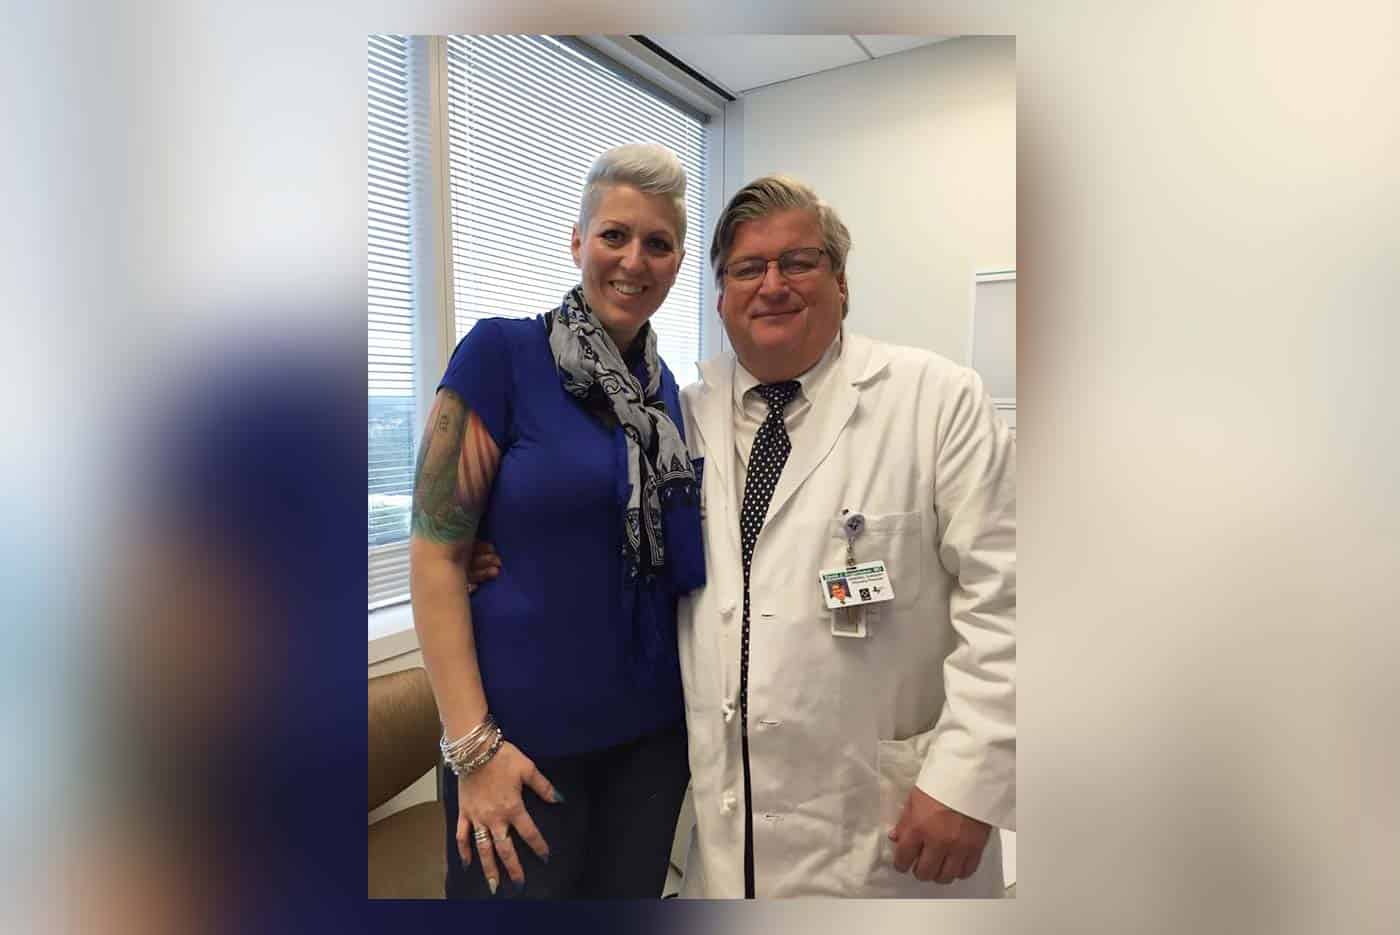 Mesothelioma survivor Heather Von St. James at her annual checkup with Dr. Sugarbaker